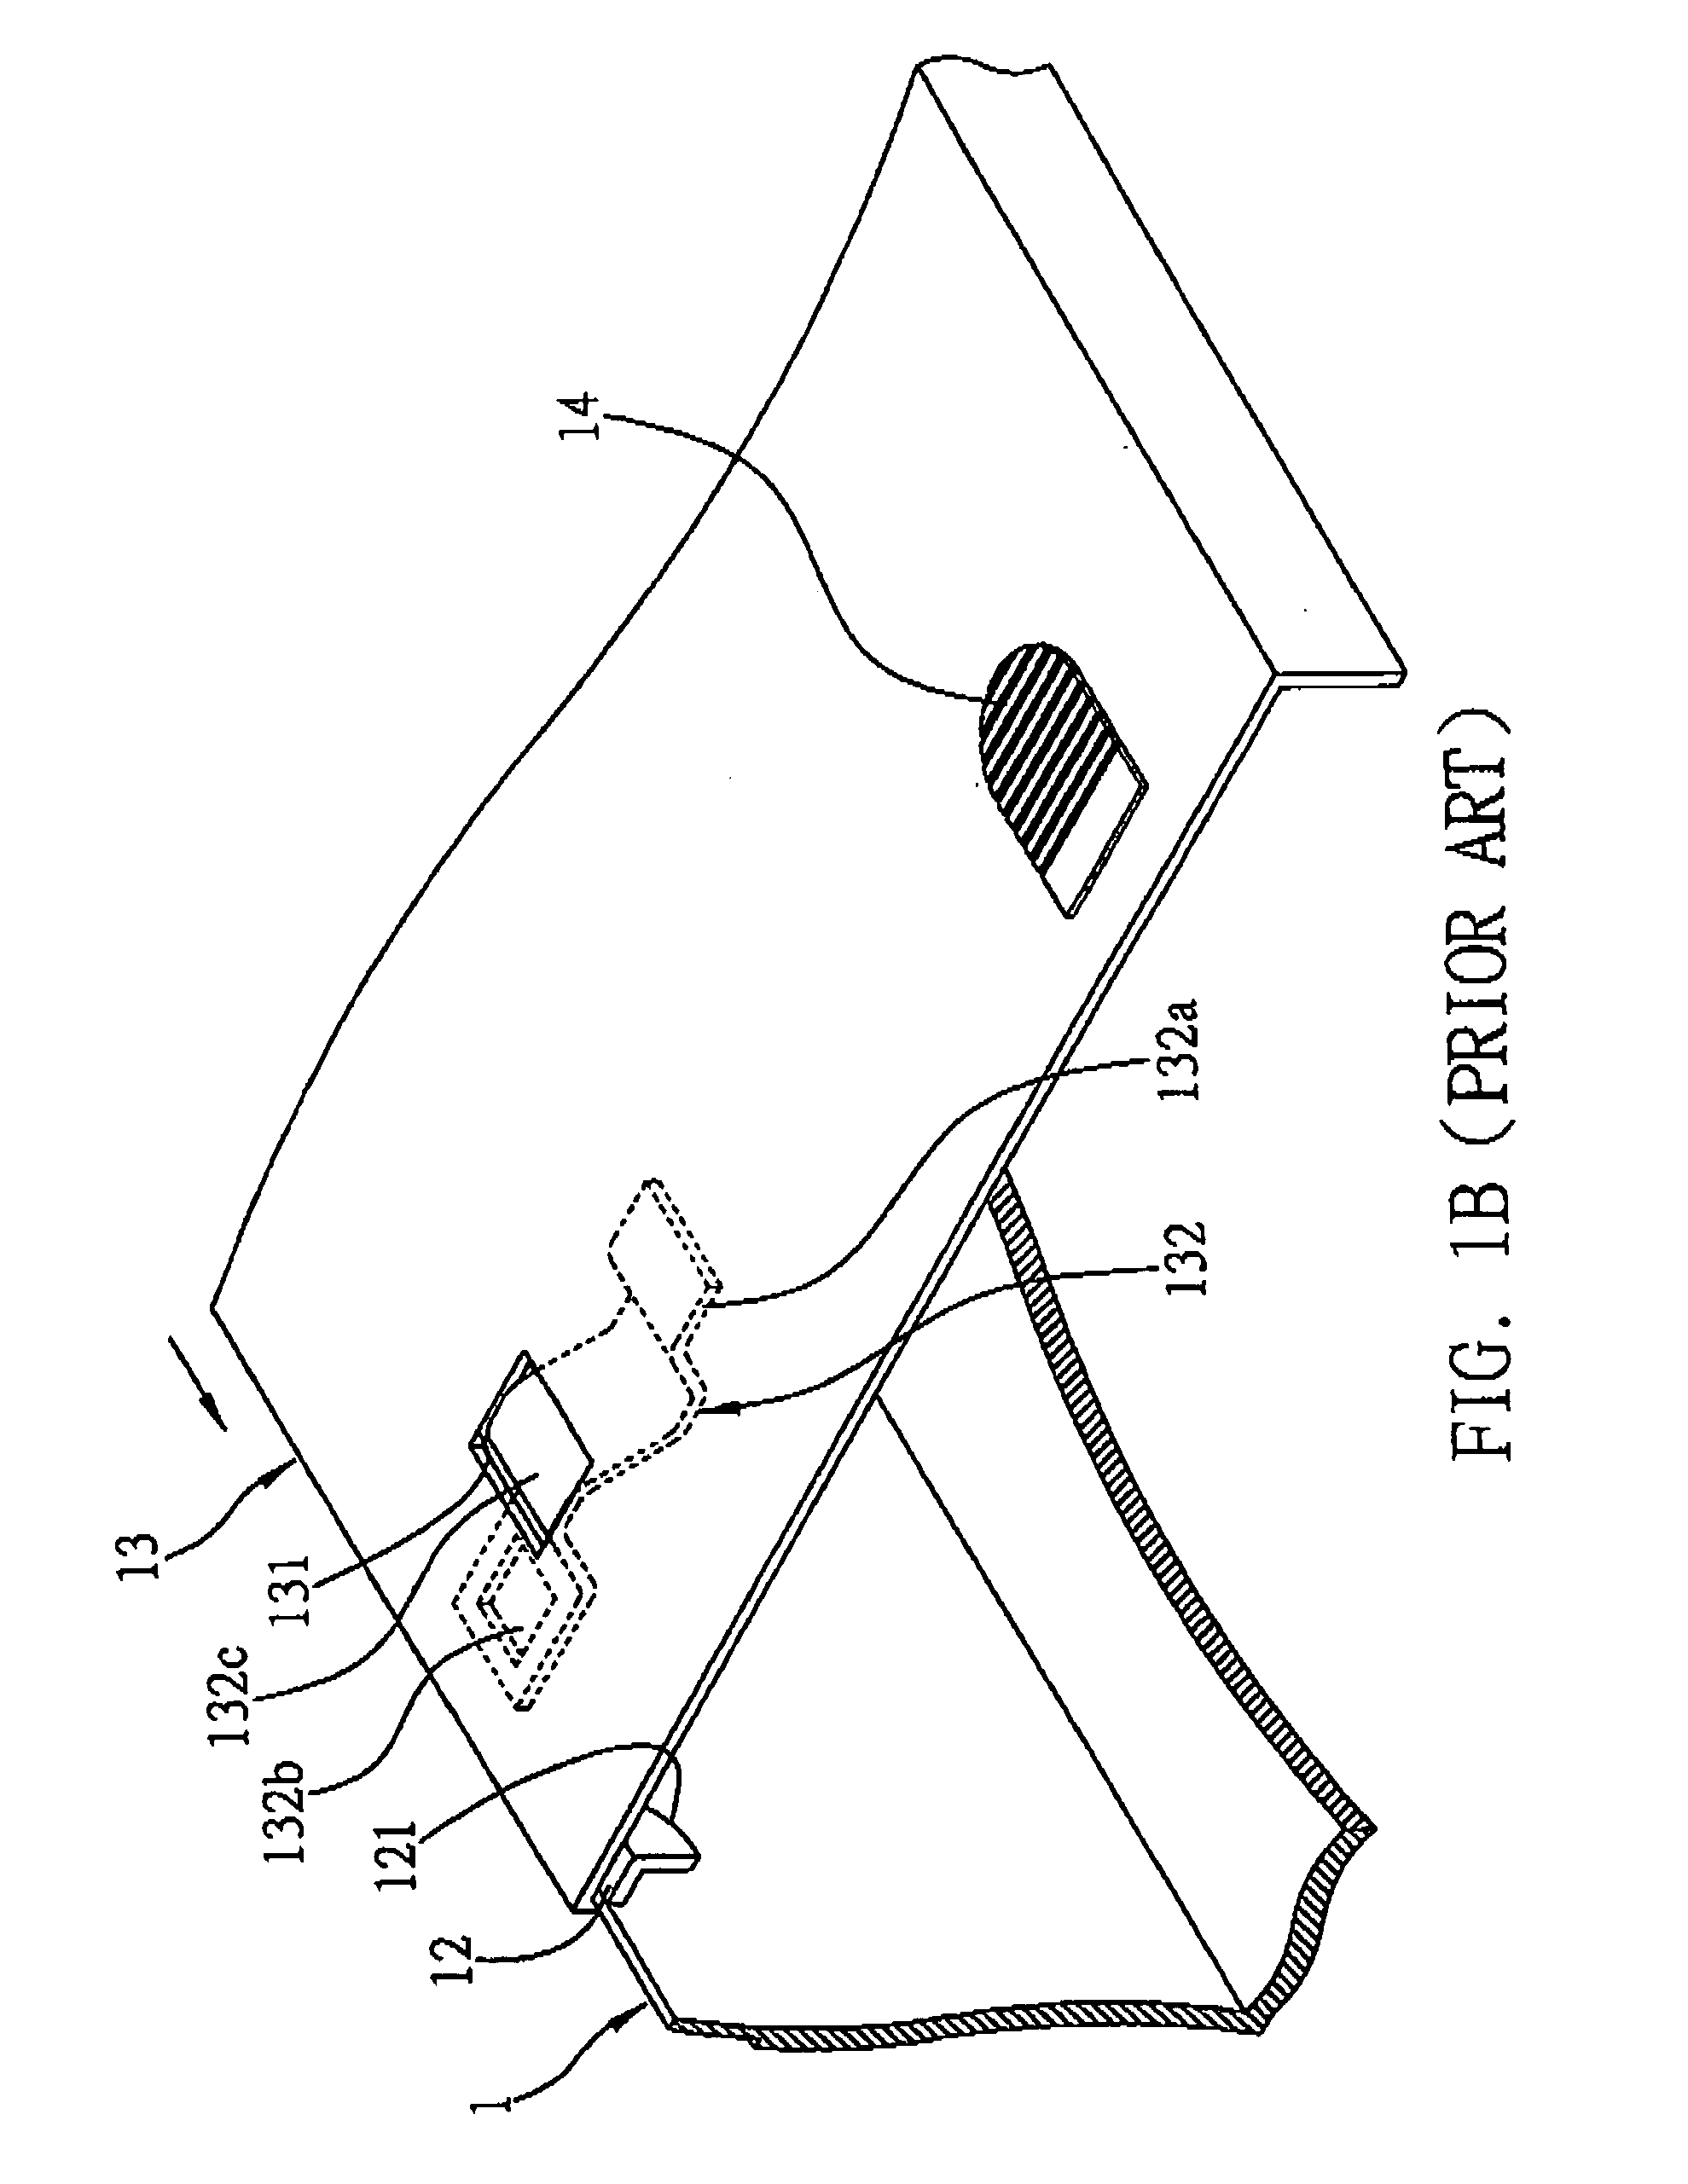 Lid body anchor system